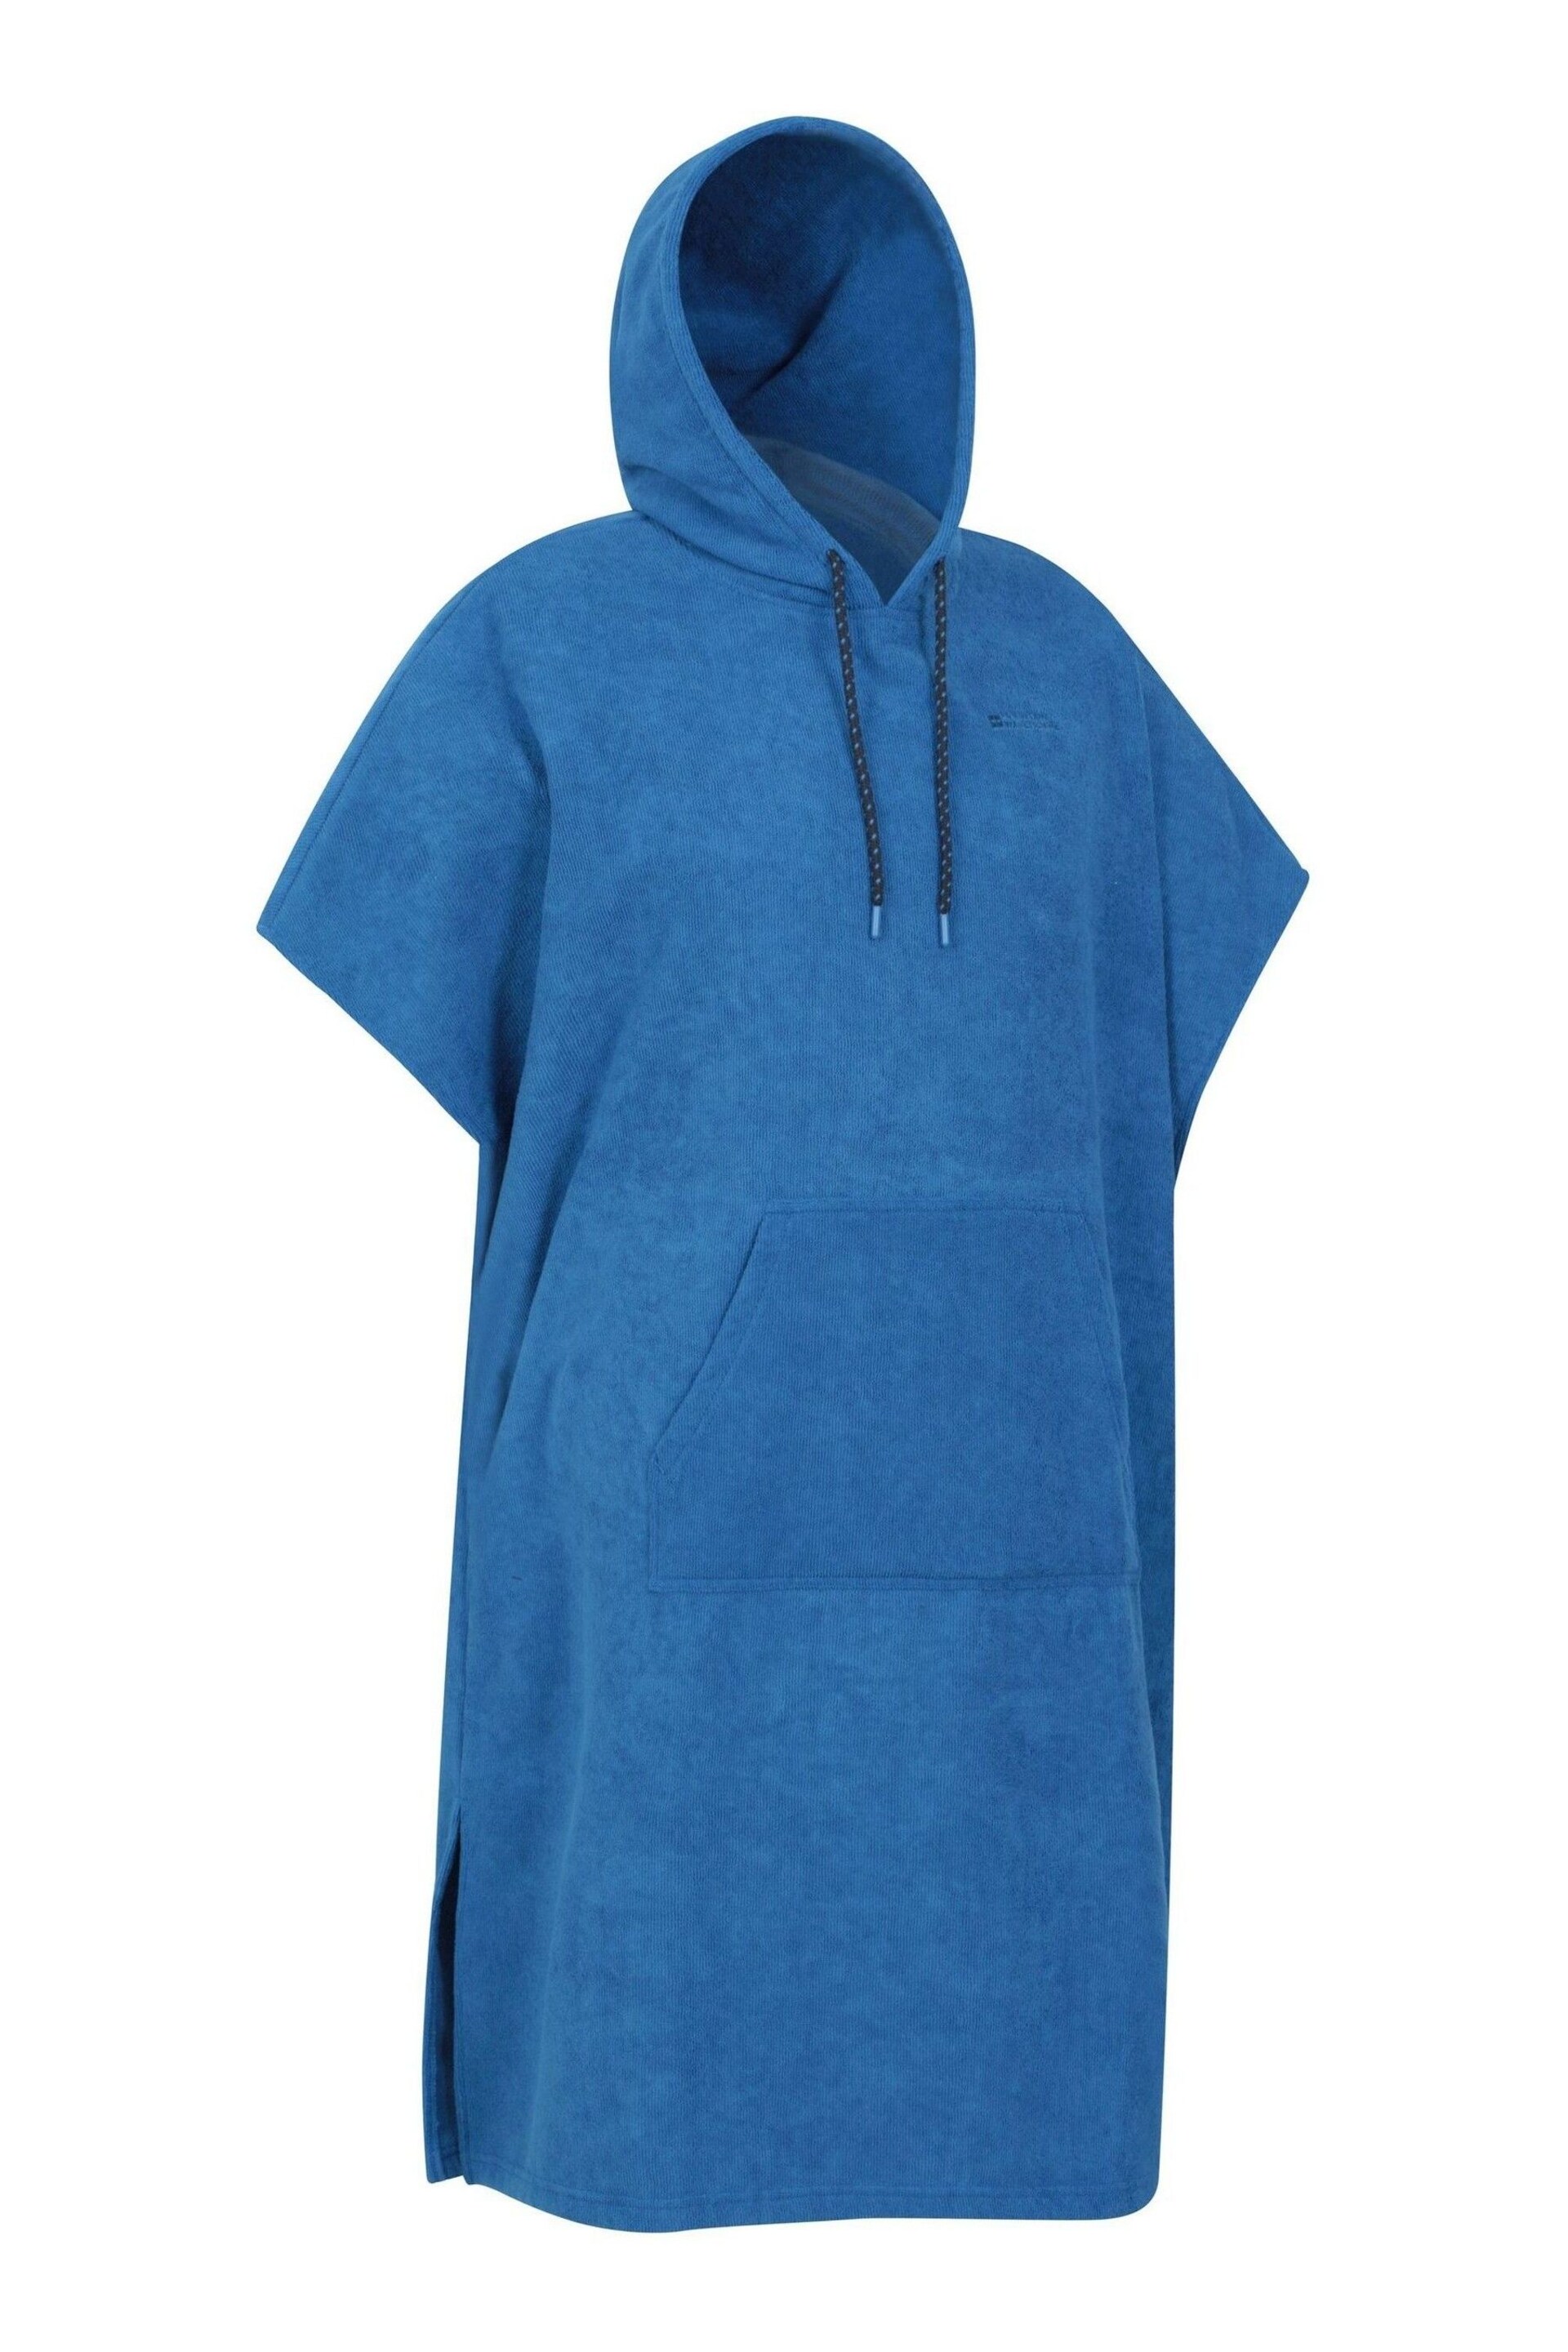 Mountain Warehouse Blue Driftwood Mens Poncho Changing Robe - Image 2 of 5